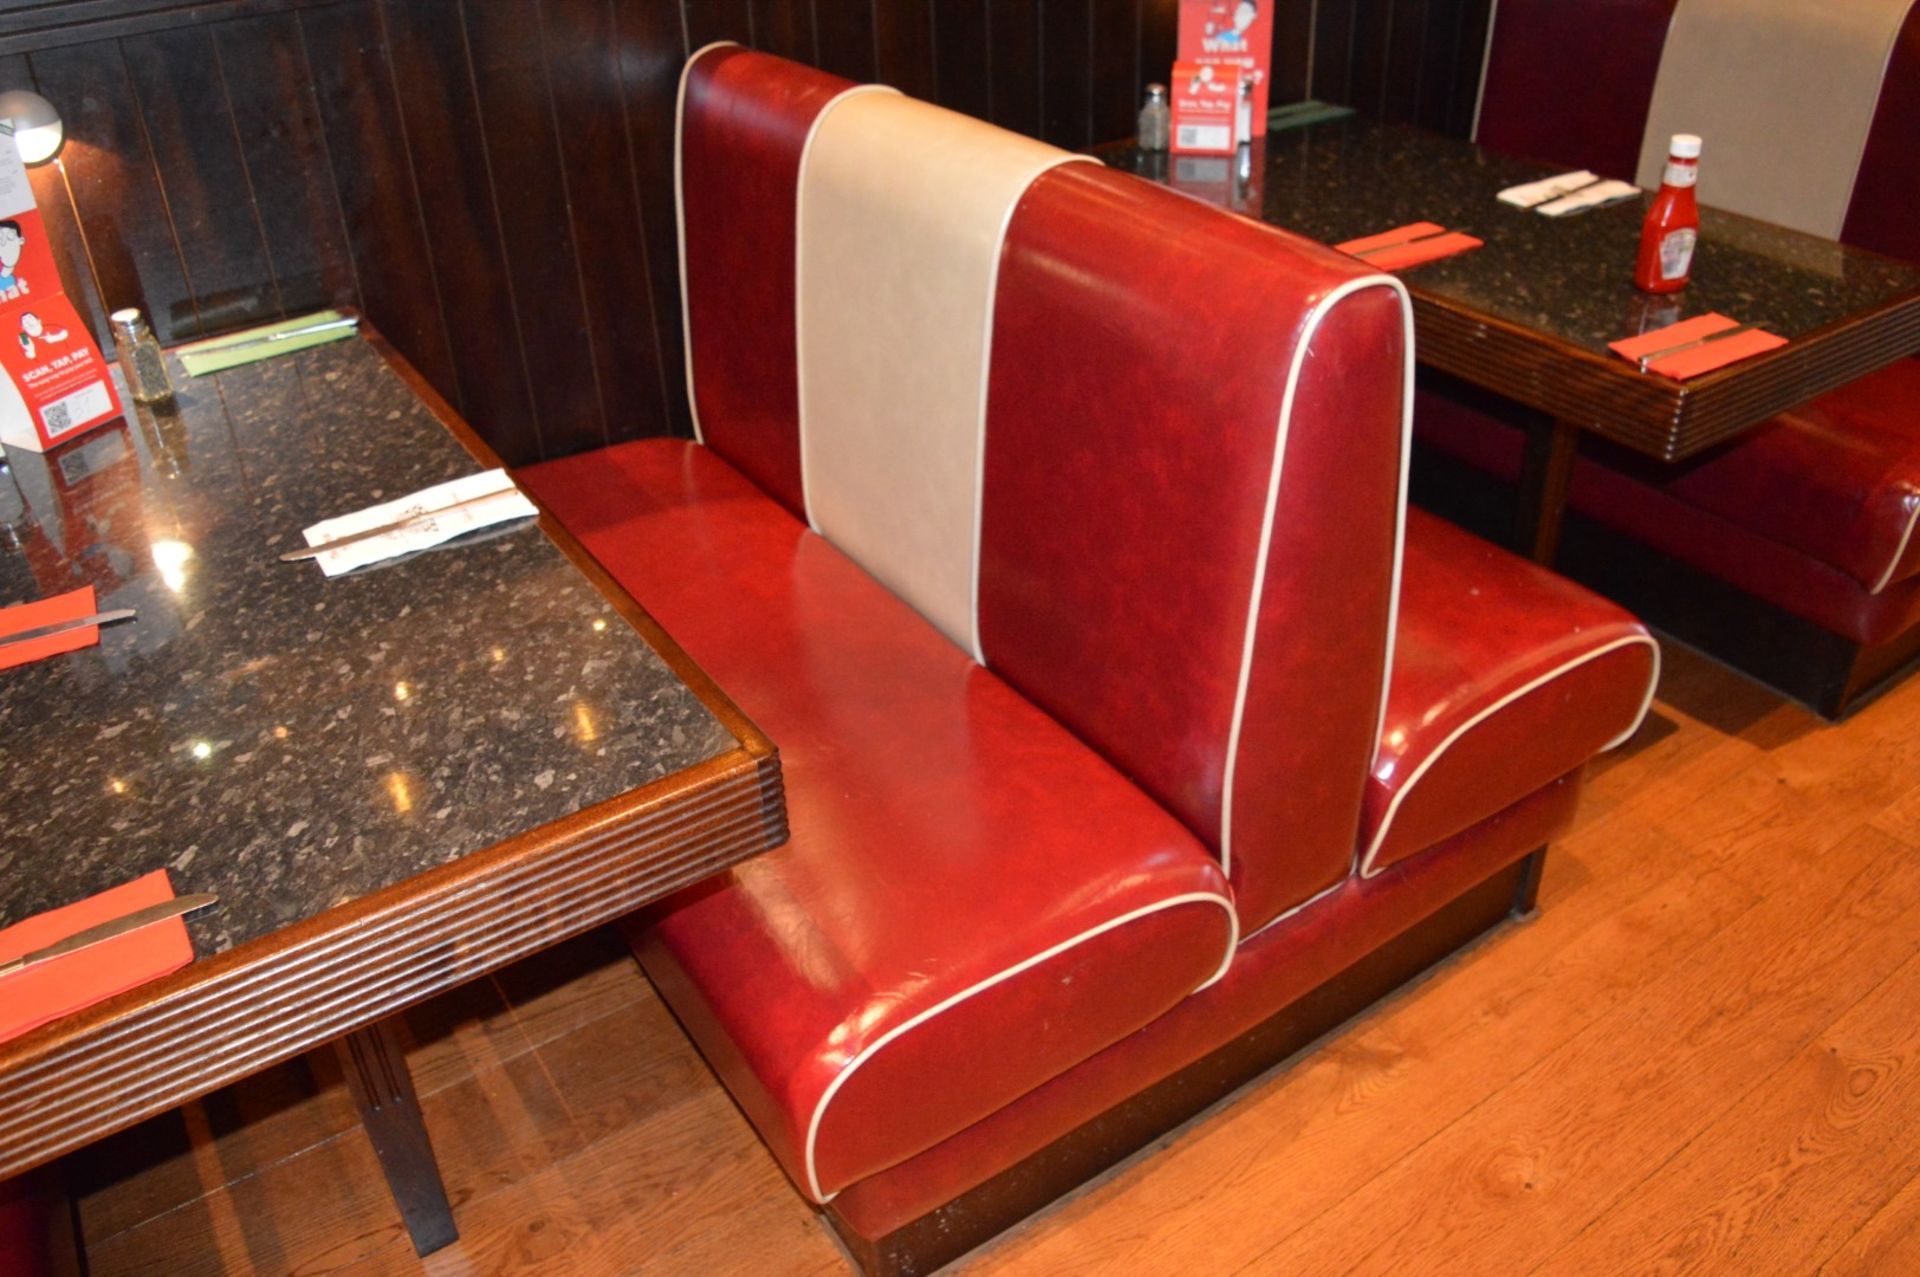 1 x Selection of Seating Booths in a 1950's Retro American Diner Design Supplied in Good Condition - - Image 5 of 7